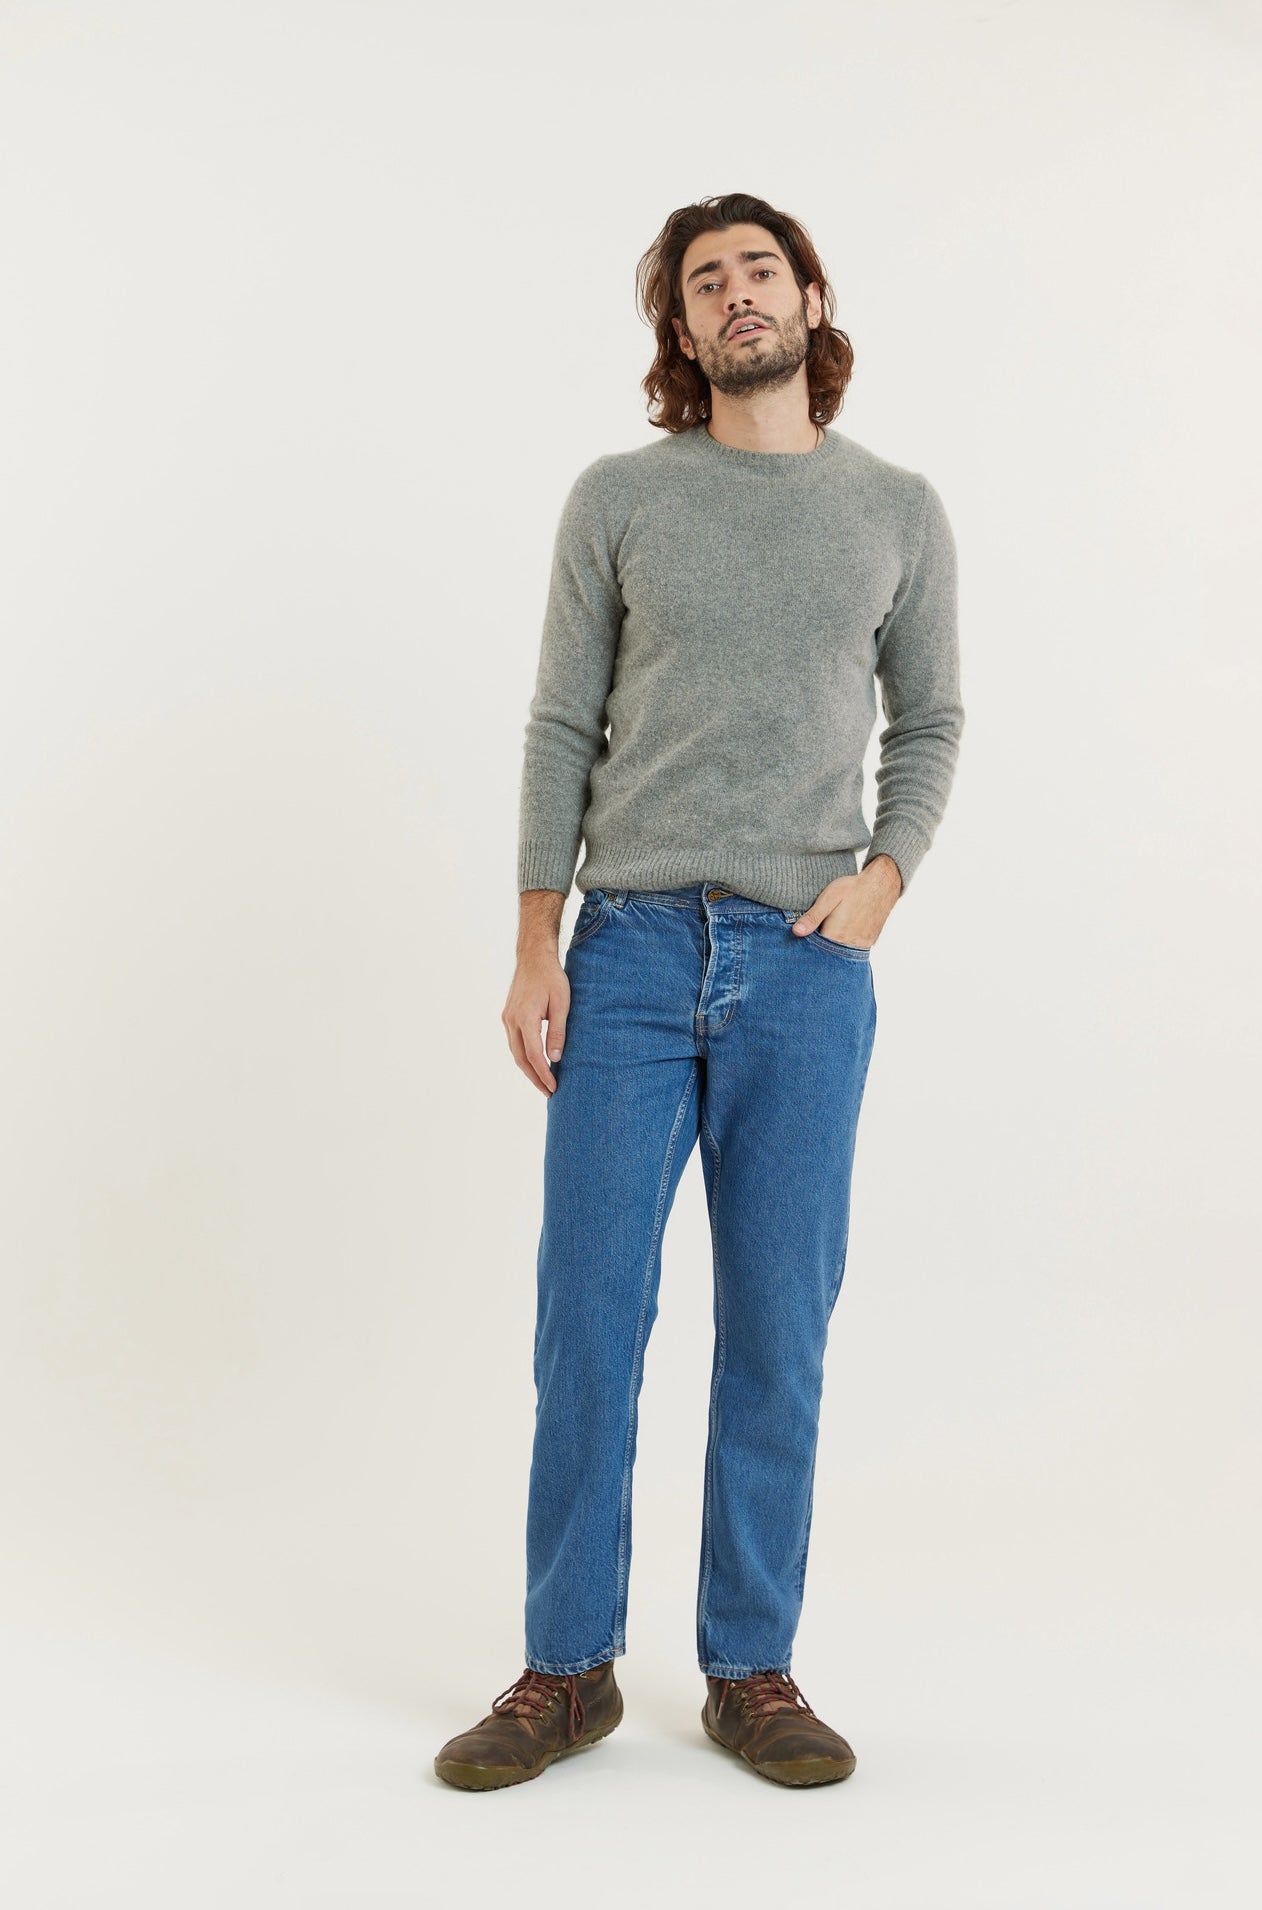 Beech Satch Classic American Jeans - Lyocell, Recycled Cotton and Acetate